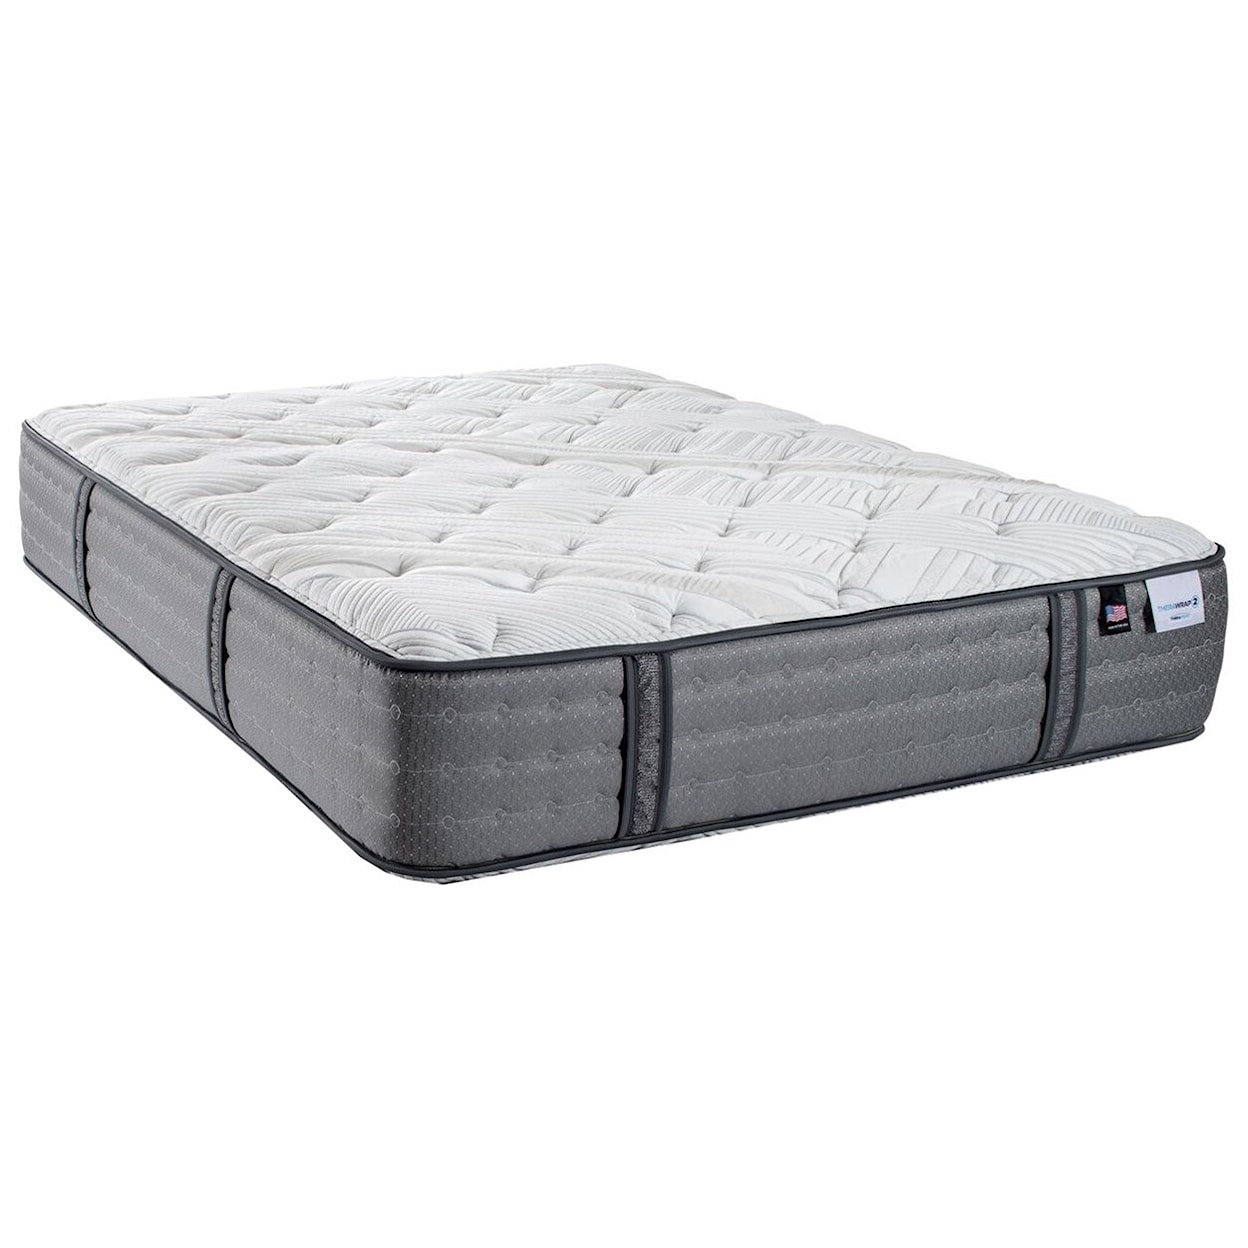 Therapedic Therawrap 2 Elle Luxury Firm Queen 2 Sided Luxury Firm Mattress